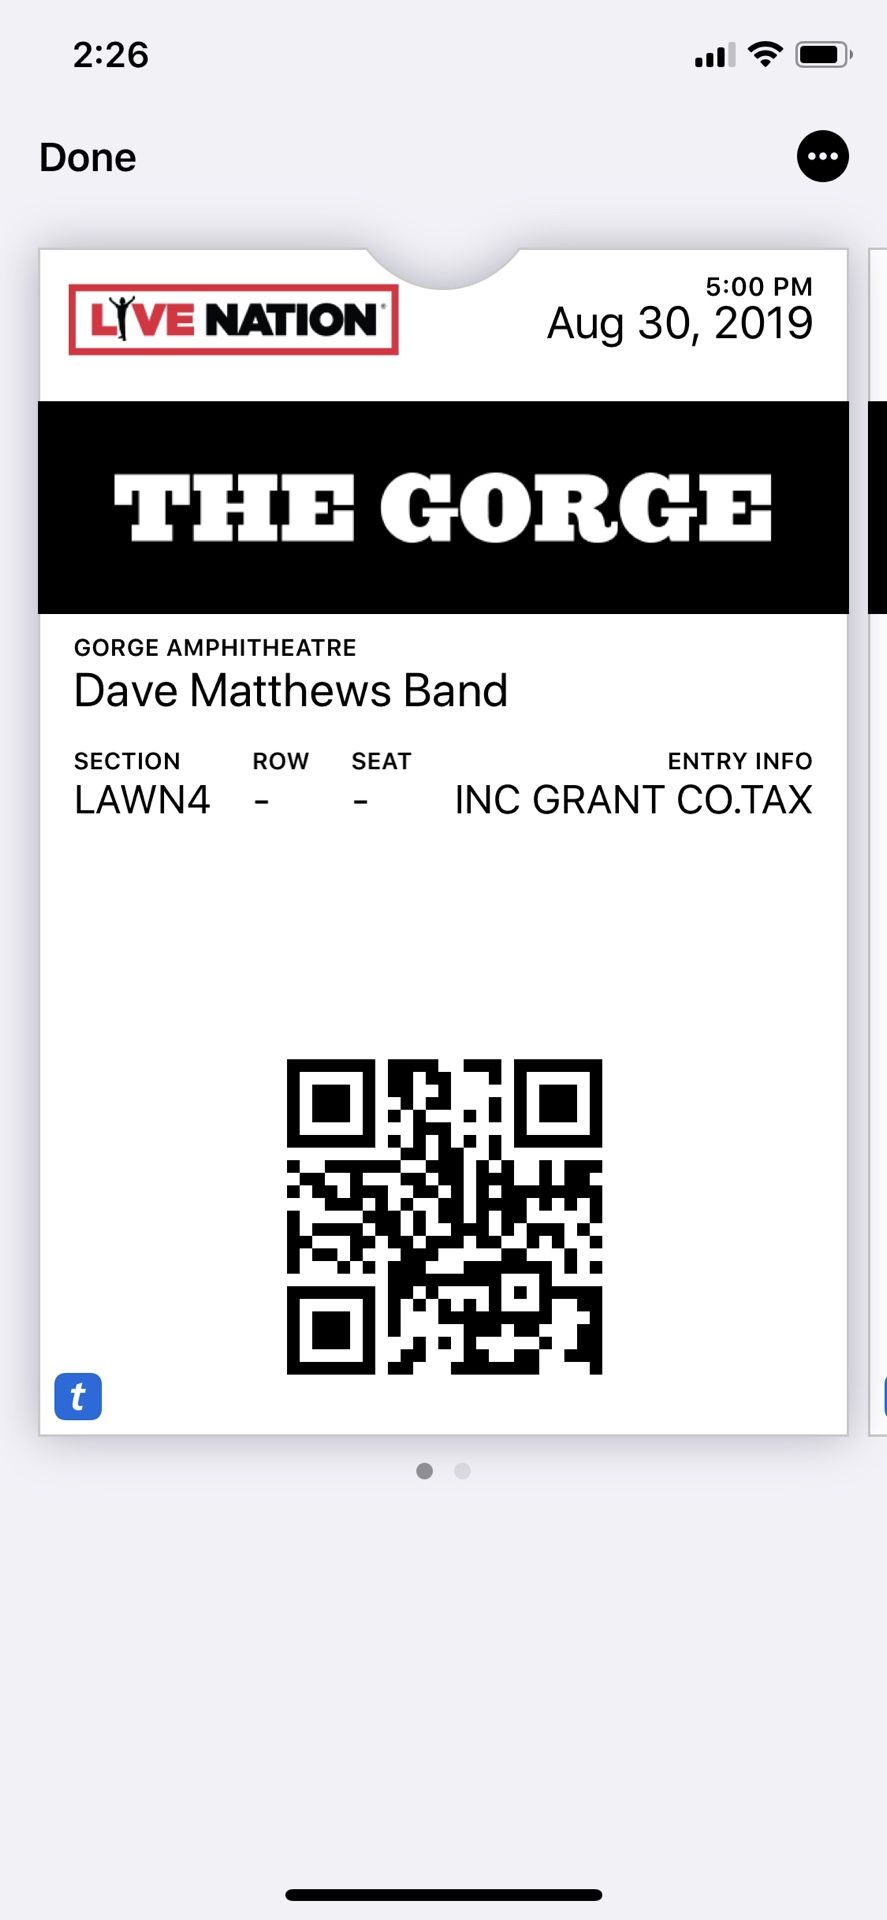 Tickets to Dave Matthews Band at the Gorge Amphitheatre (Fri 8-30-19)